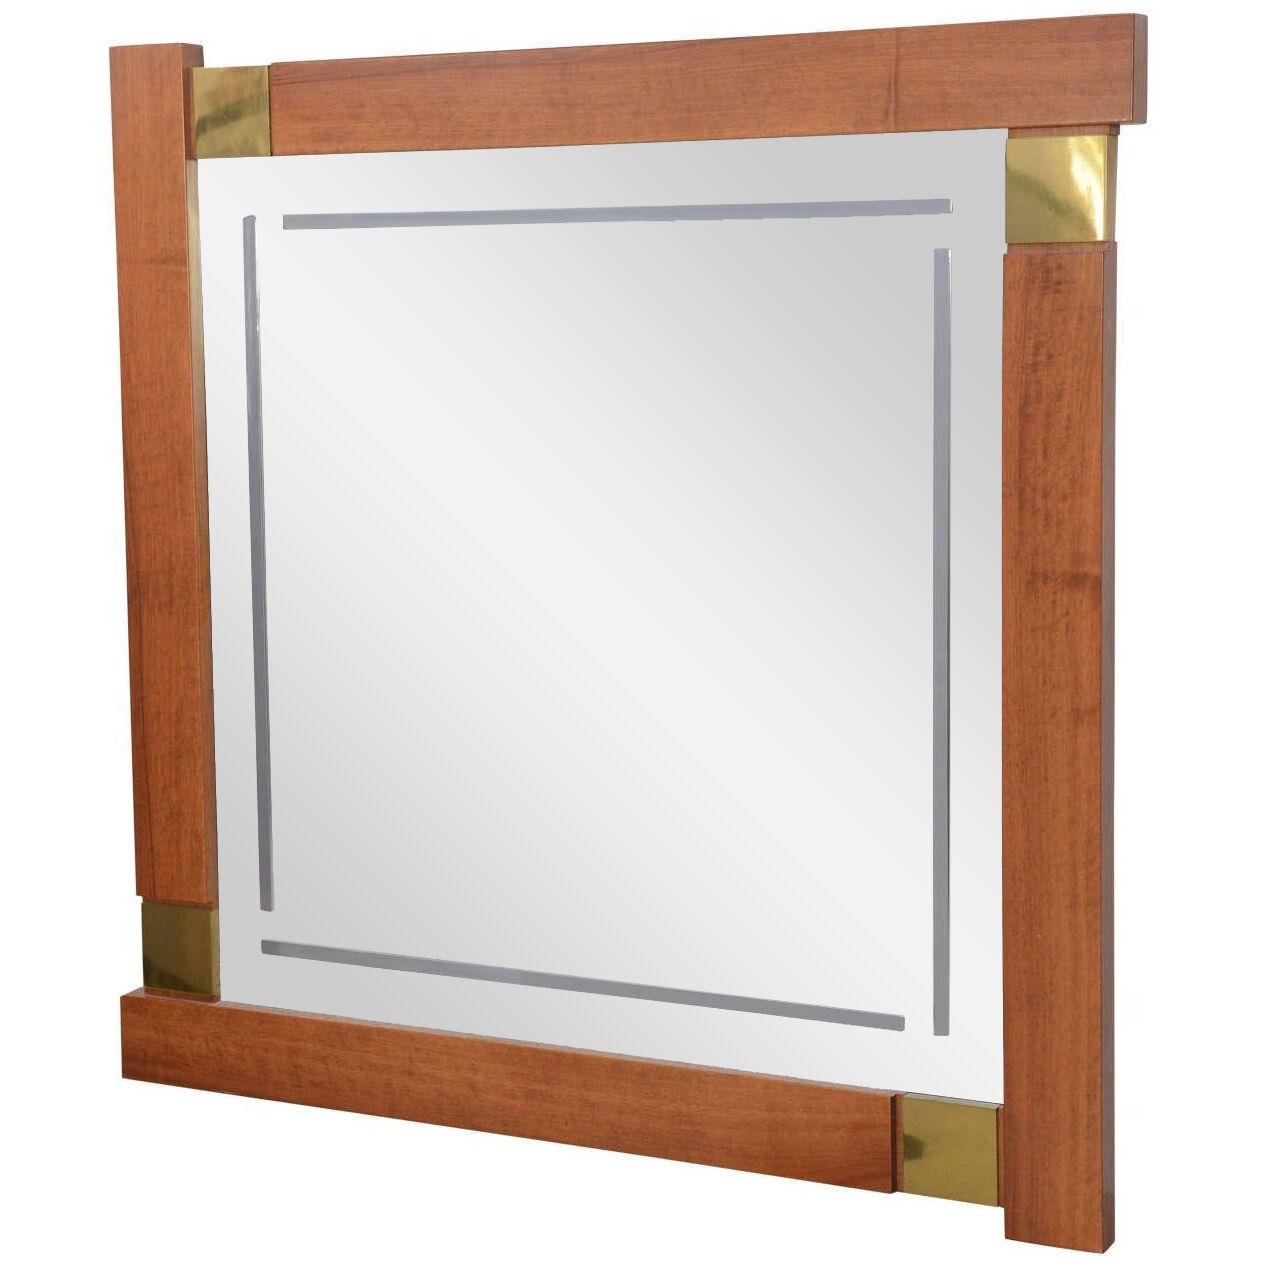 Large Italian Modern Walnut and Brass Mirror, Attributed to Giovanni Michelucci